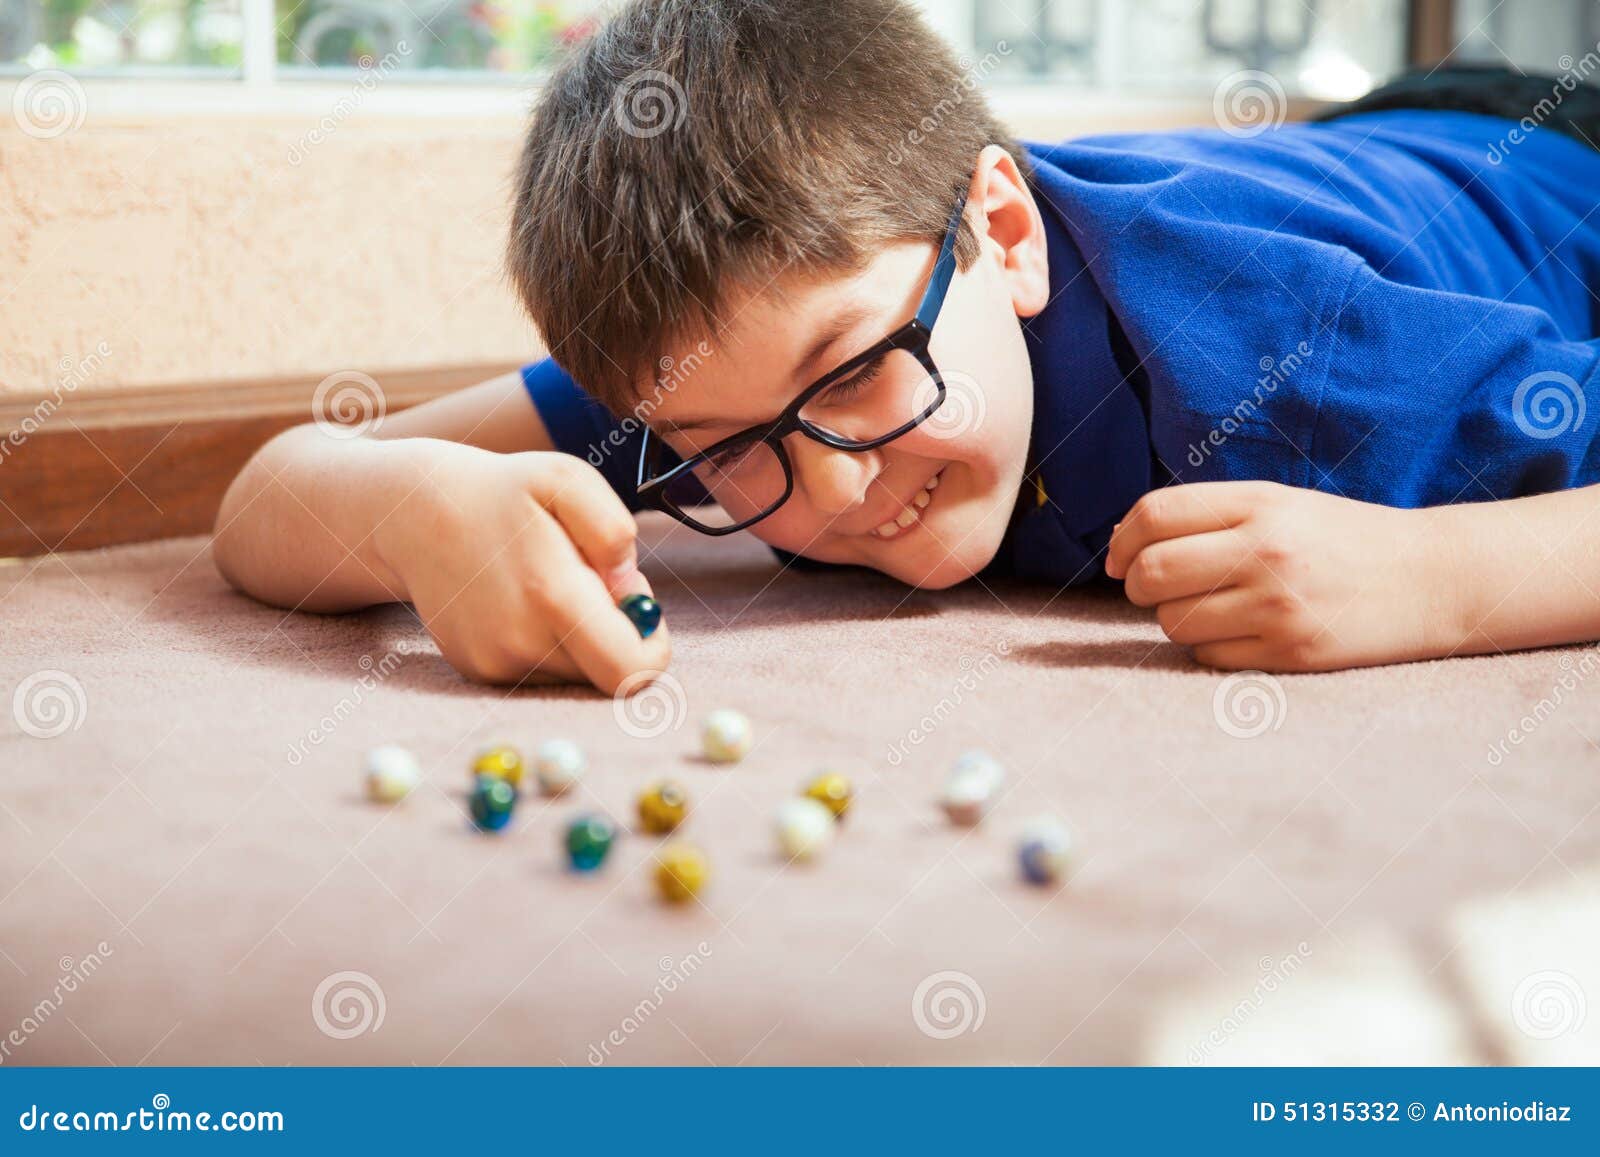 kid playing with marbles